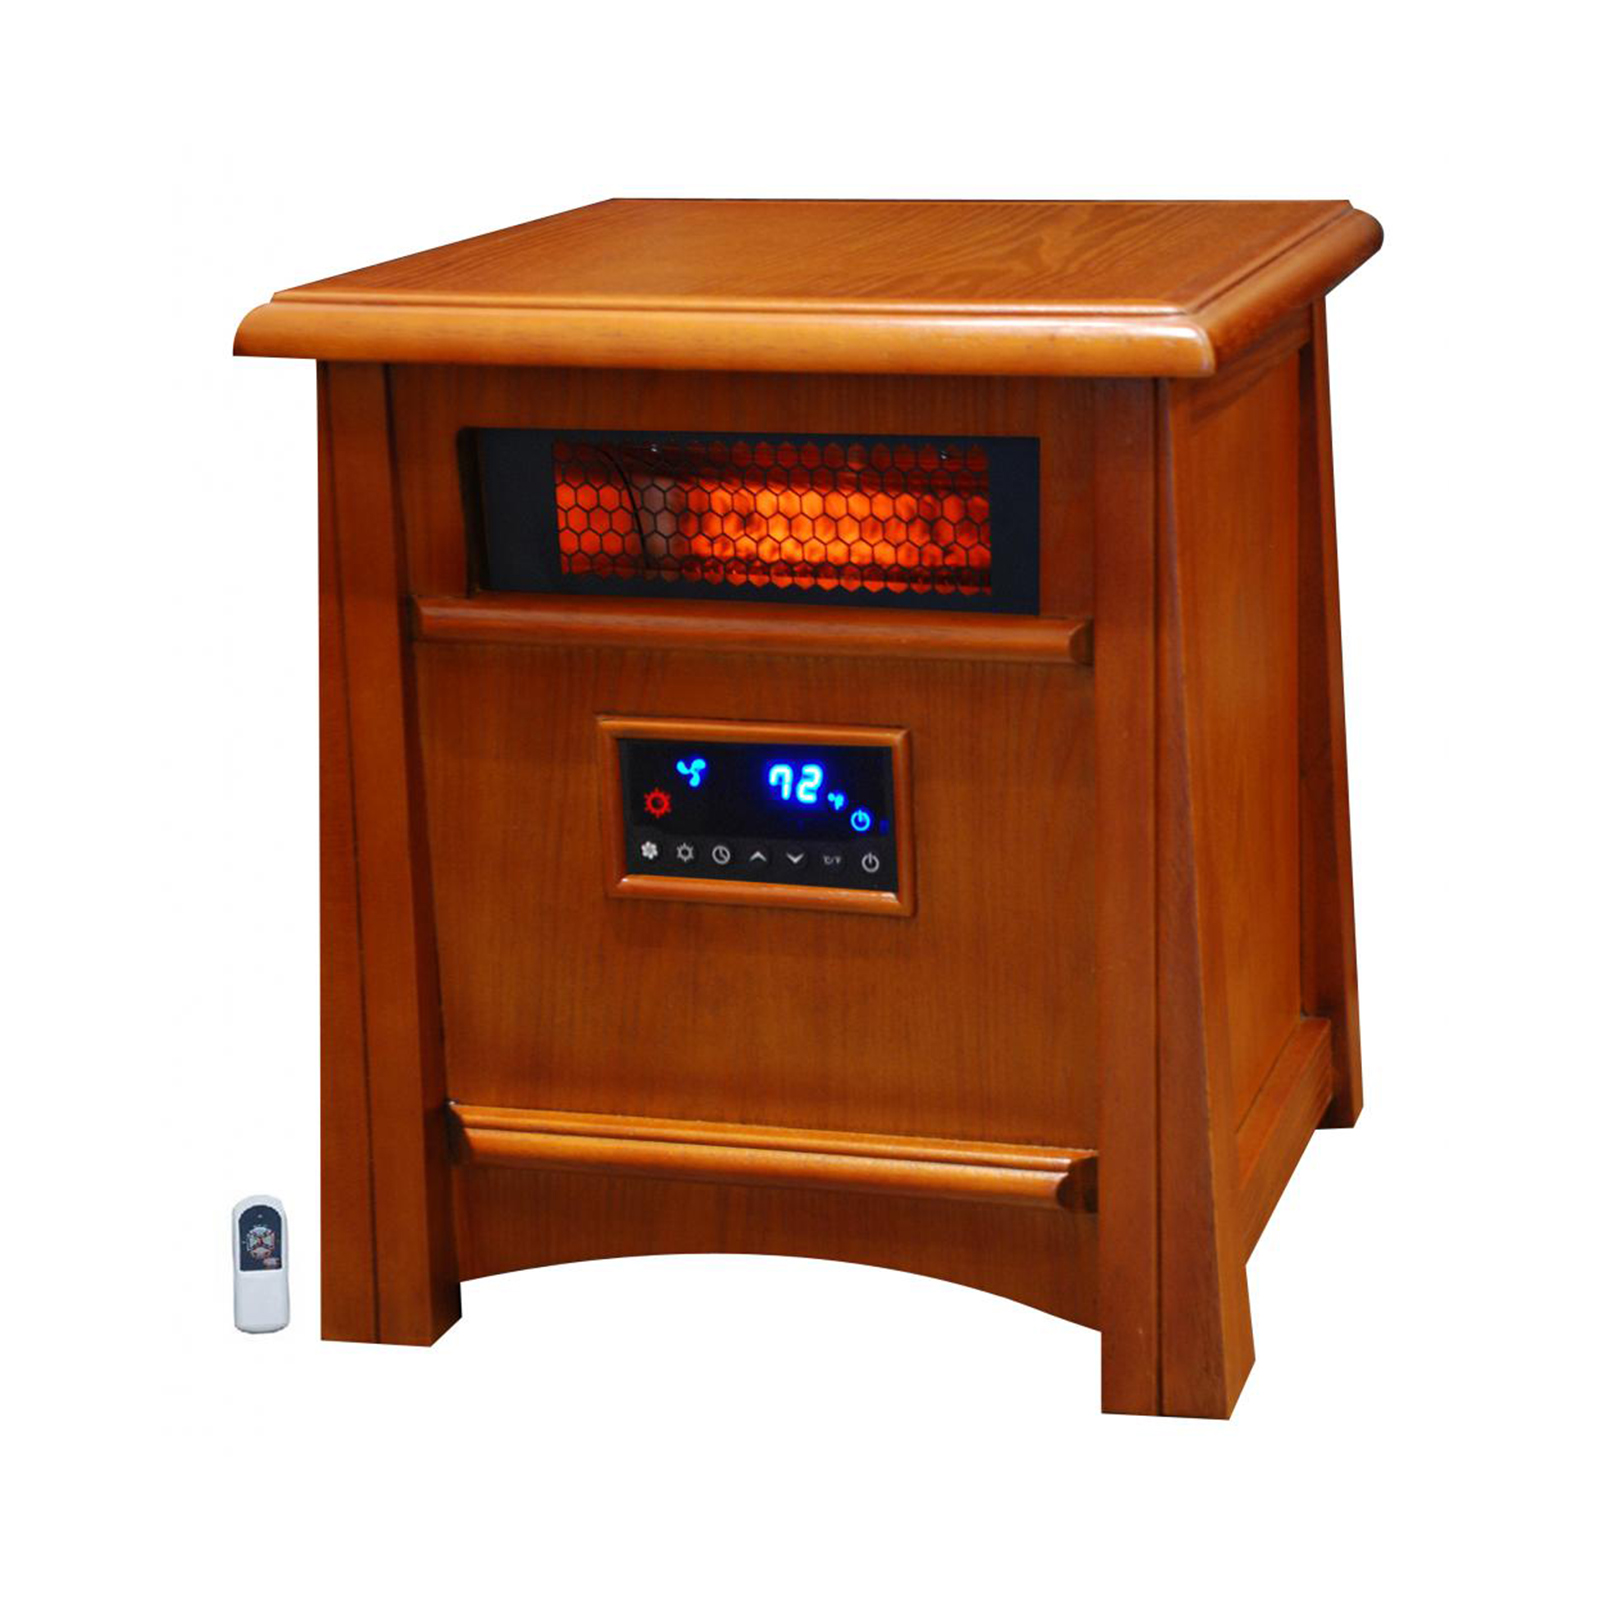 Lifesmart LS-8WIQH-LB-IN Ultimate 8 Element 1800 Square Foot Infrared Heater W/ Air Ionizer System Deluxe  All Wood Cabinet & Remote